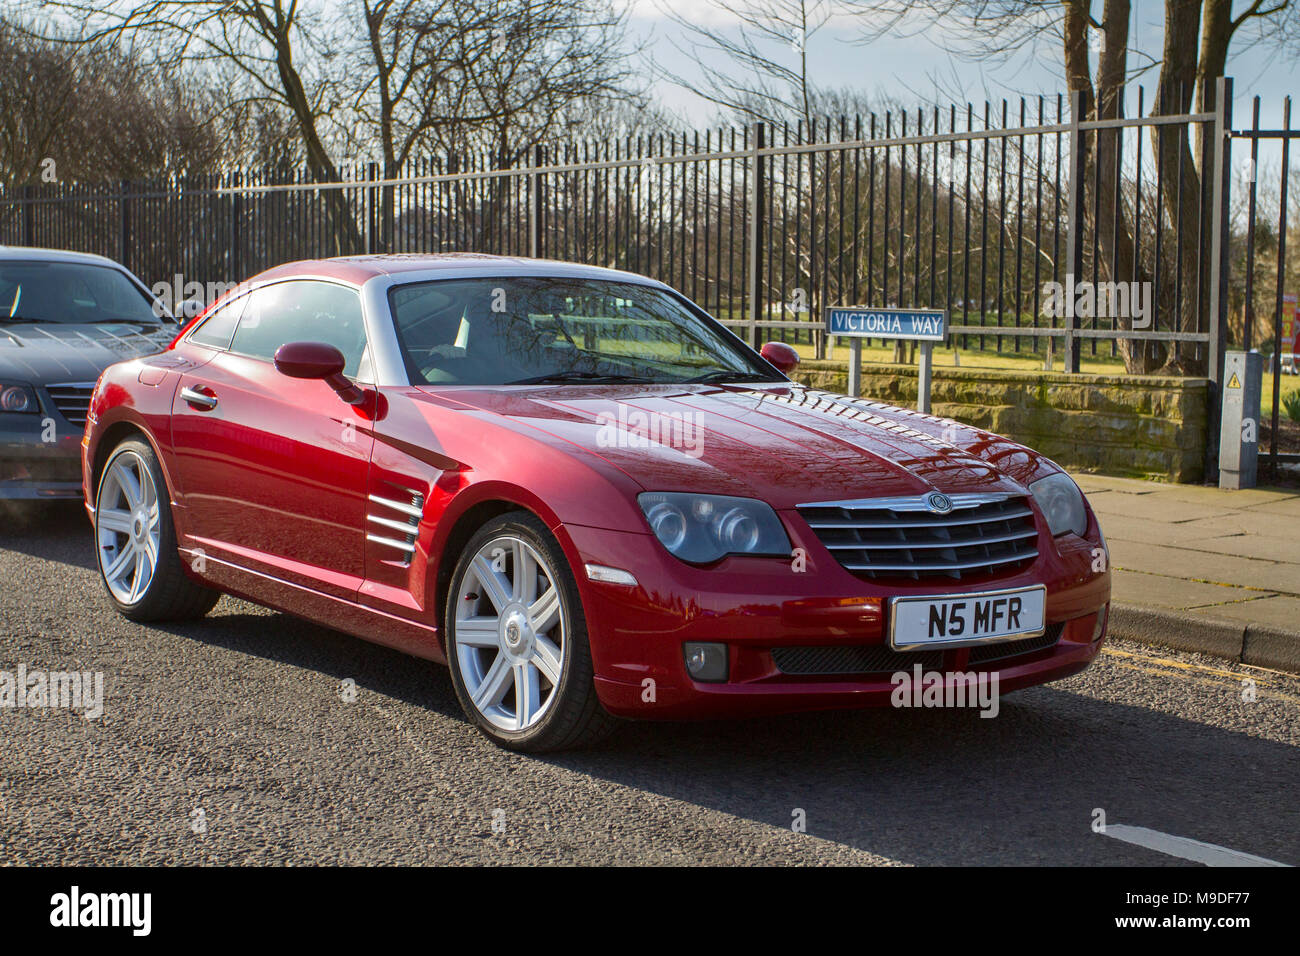 Supercars Southport, Merseyside, UK 25th March 2018.  UK Weather. 2004 red Chrysler Crossfire auto 3199cc petrol coupe at the North-West Supercar event as cars and tourists arrive in the coastal resort. Cars are bumper to bumper on the seafront esplanade as classic & American car enthusiasts take advantage of warm weather for a motoring day out. Stock Photo